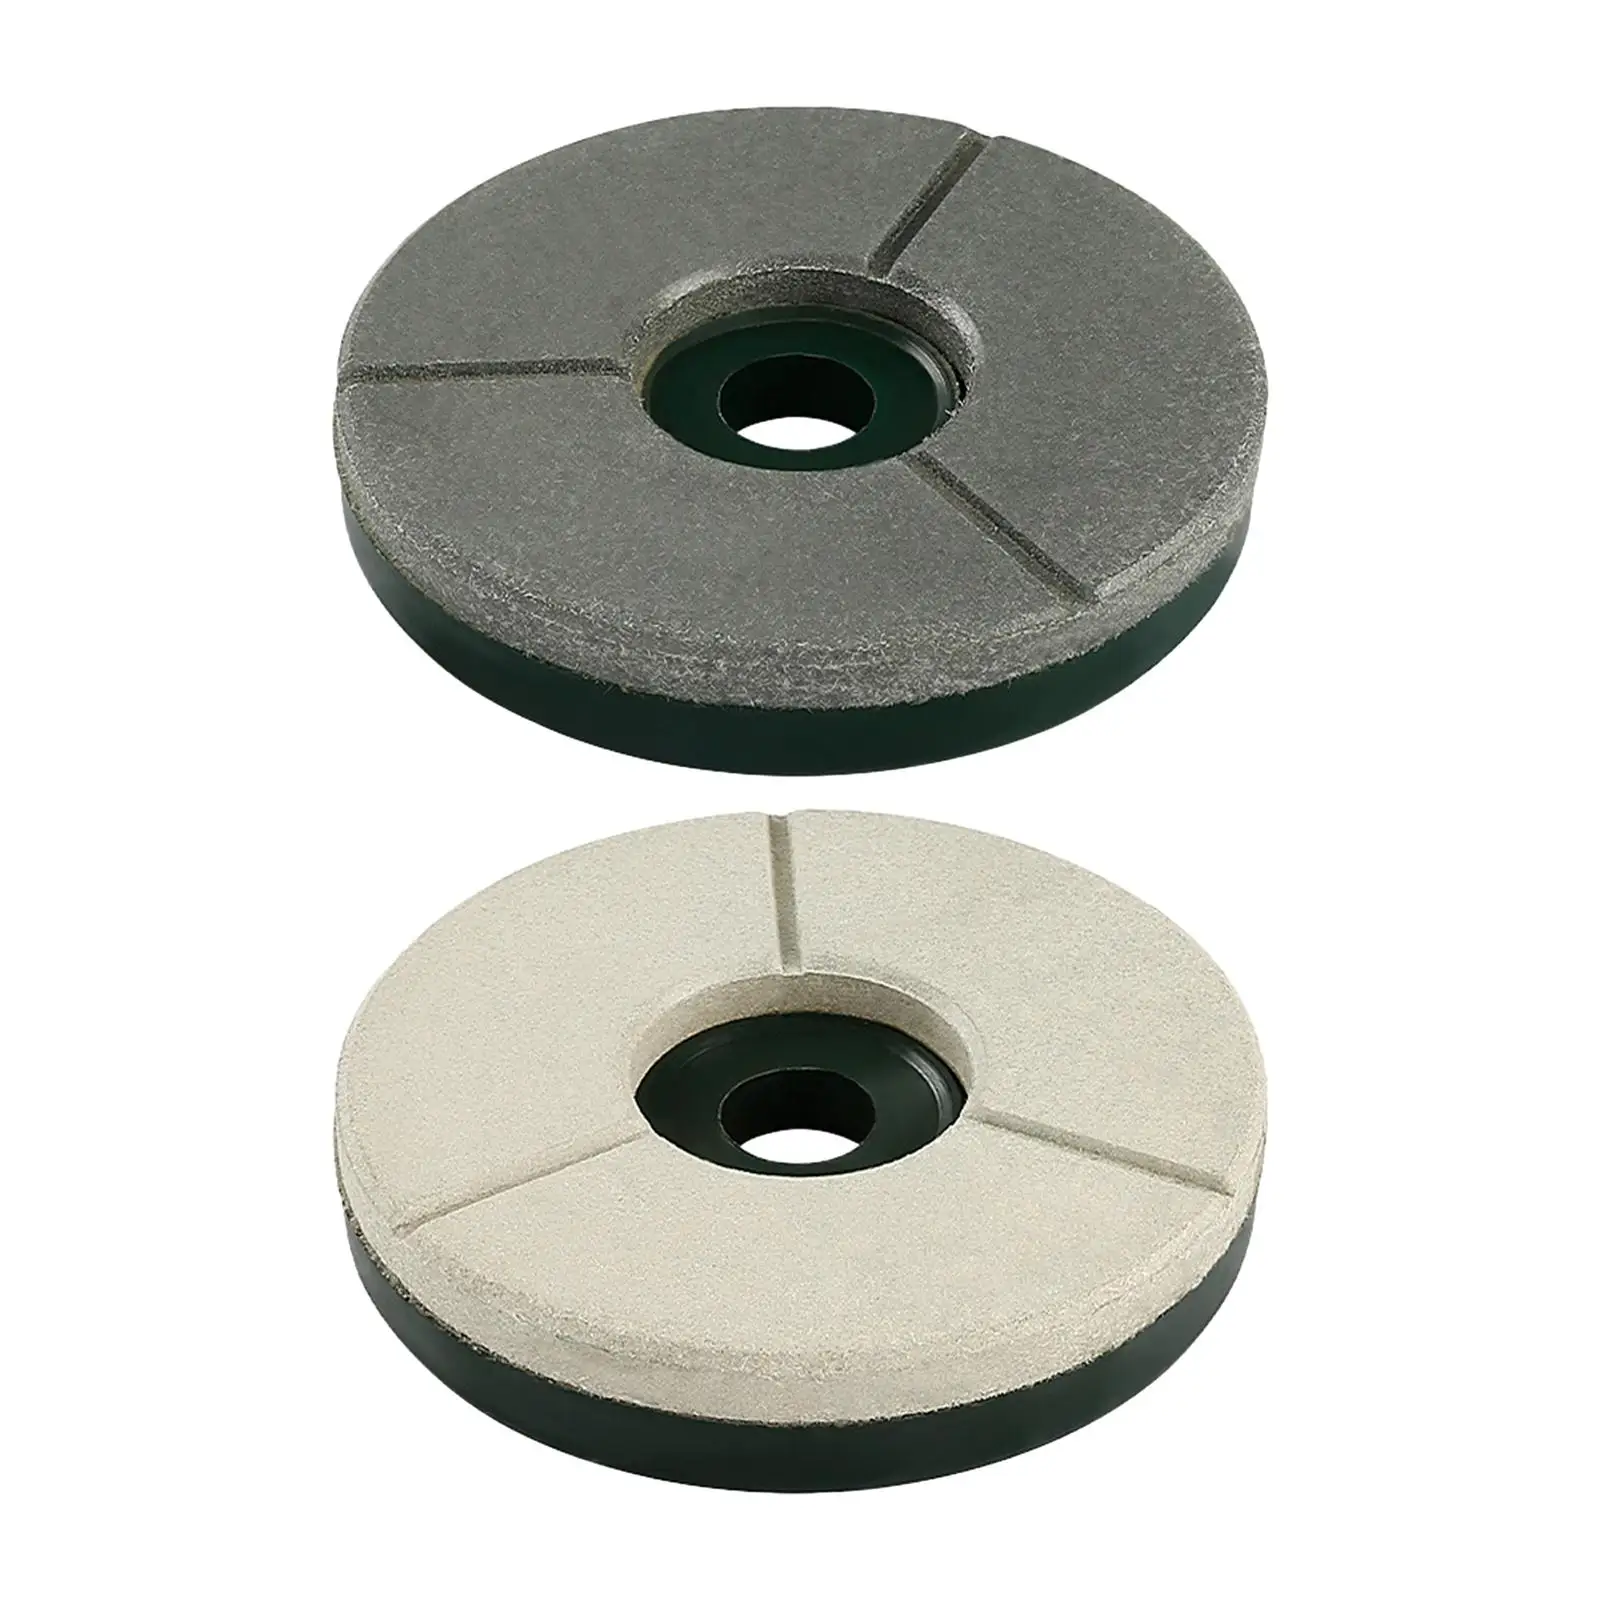 Grinder Polishing Disc Lapping Disc Tool Polishing Accessories Diamond Lap Disc for Tombstones Granite Slabs Building Materials